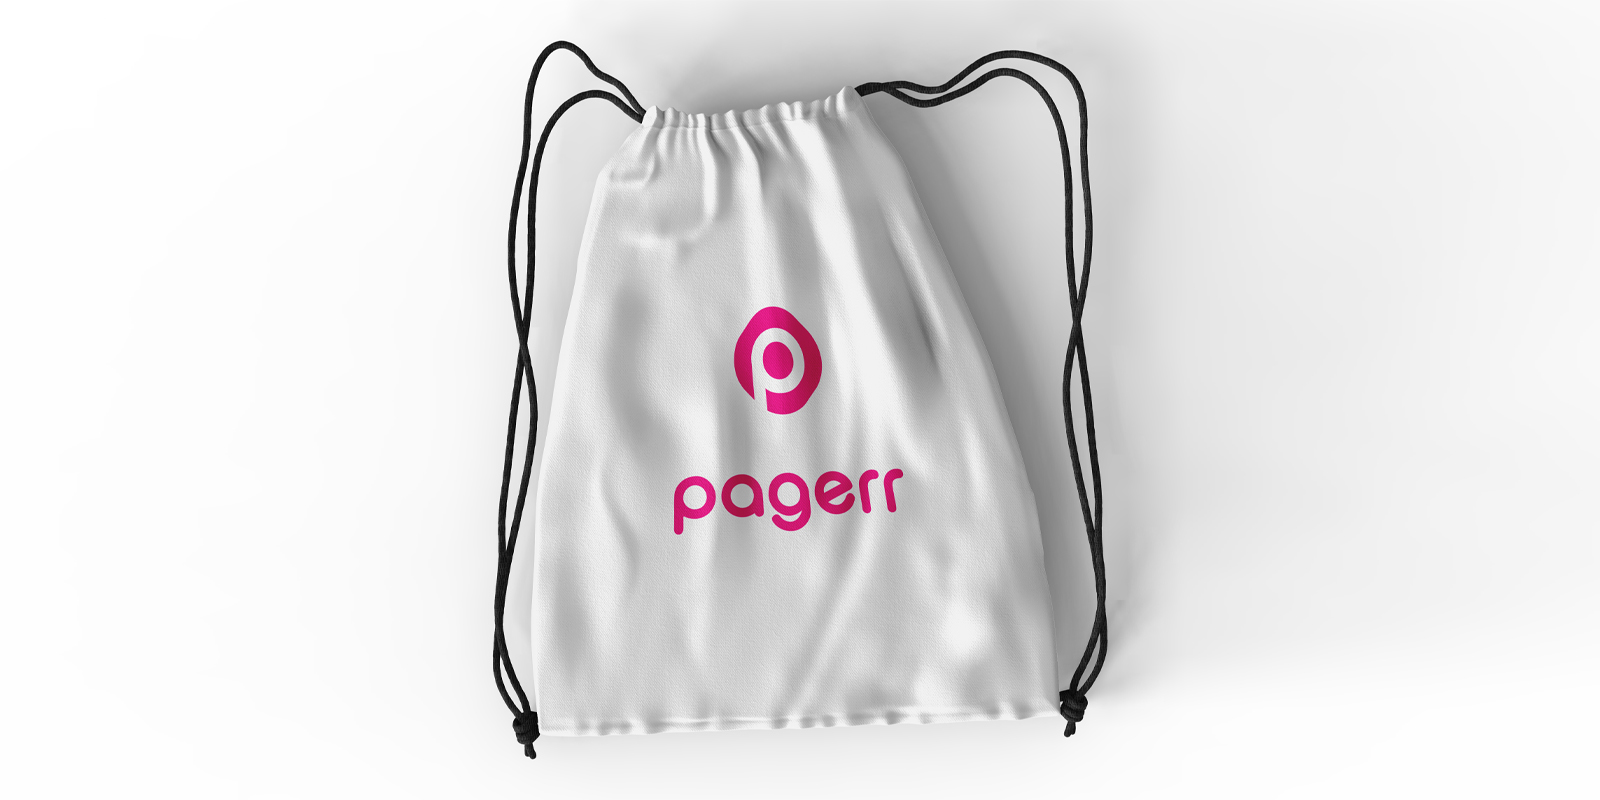 Drawstring backpacks in Barcelona - Print with Pagerr